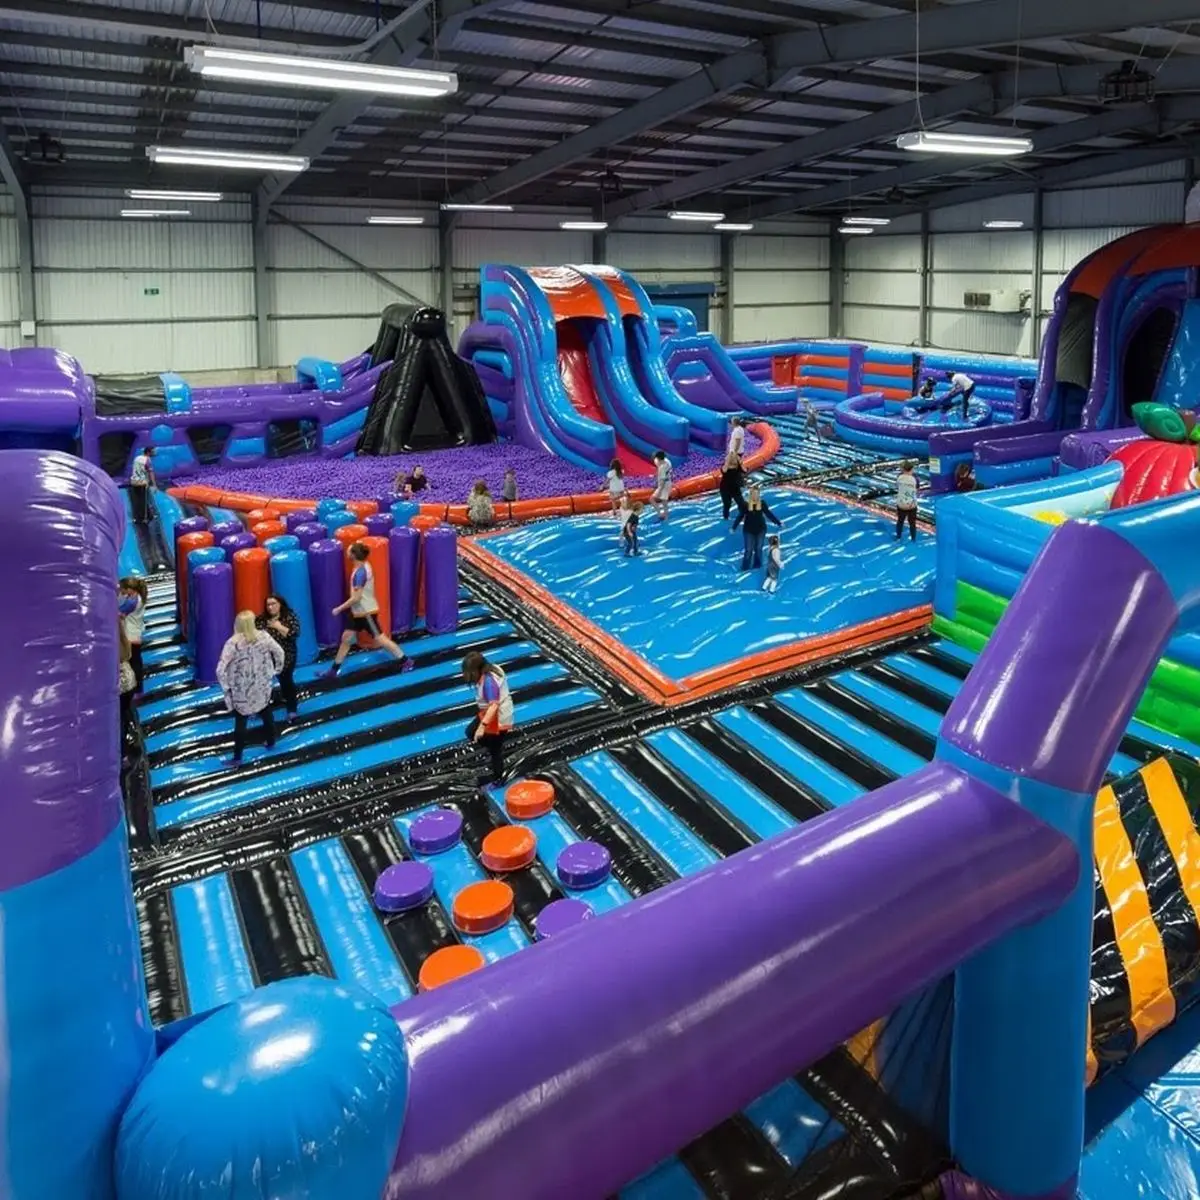 Evalueerbaar Cursus driehoek Largest 2000m2 Inflatable Amusement Park Equipment,Inflatable Indoor Theme  Park For Kids Play - Buy Largest Inflatable Amusement Park Game,Inflatable  Indoor Kids,Airquees 2000m2 Inflatable Theme Park Product on Alibaba.com